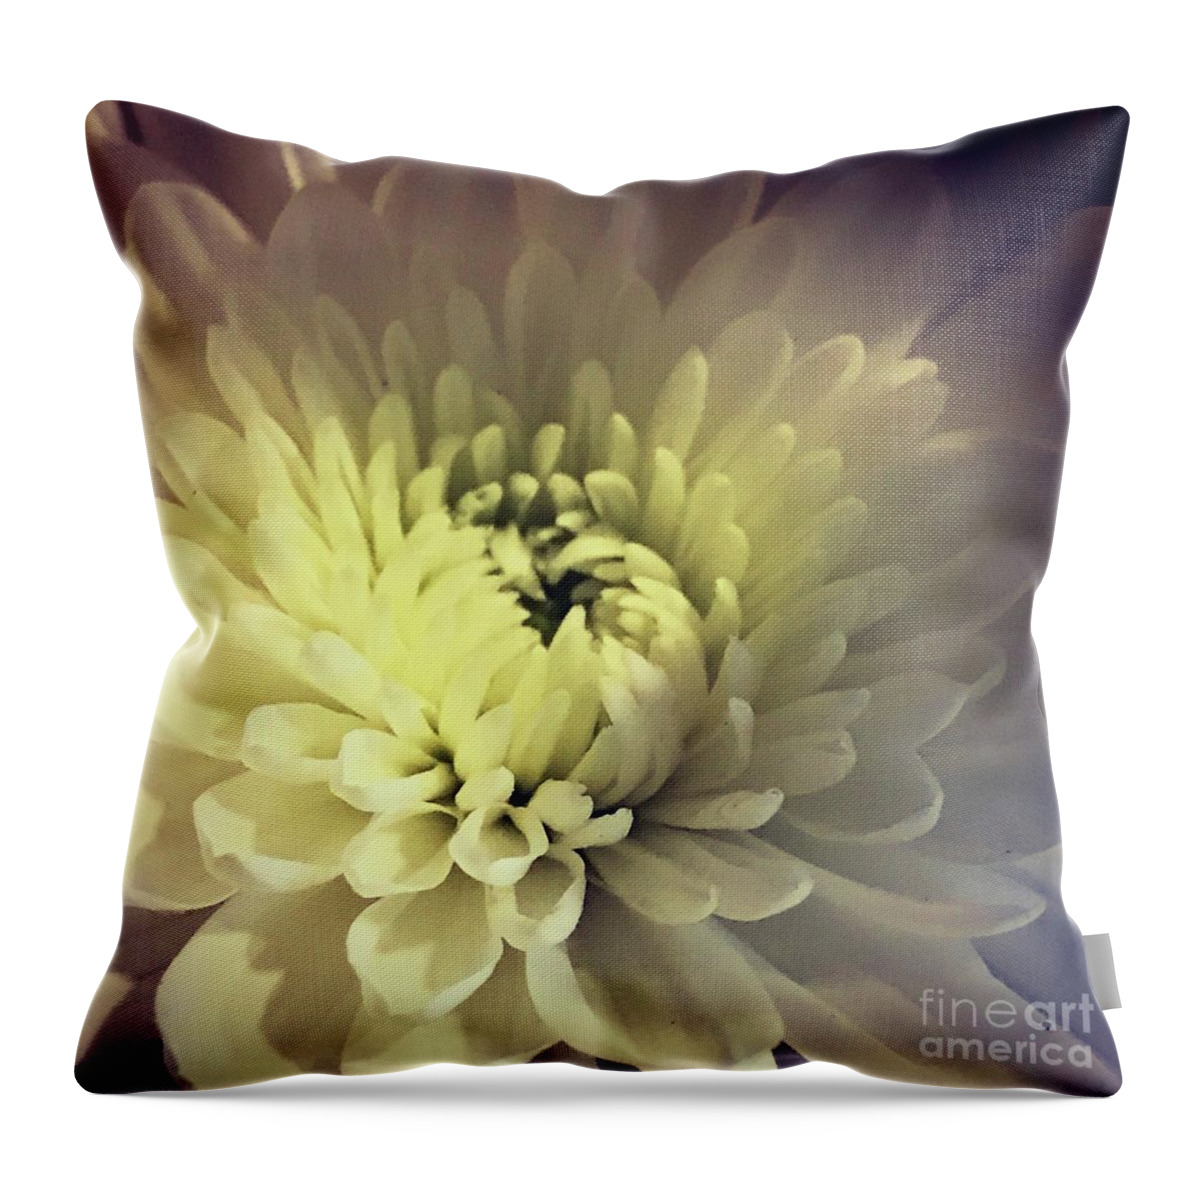 White Throw Pillow featuring the photograph Flower by Deena Withycombe